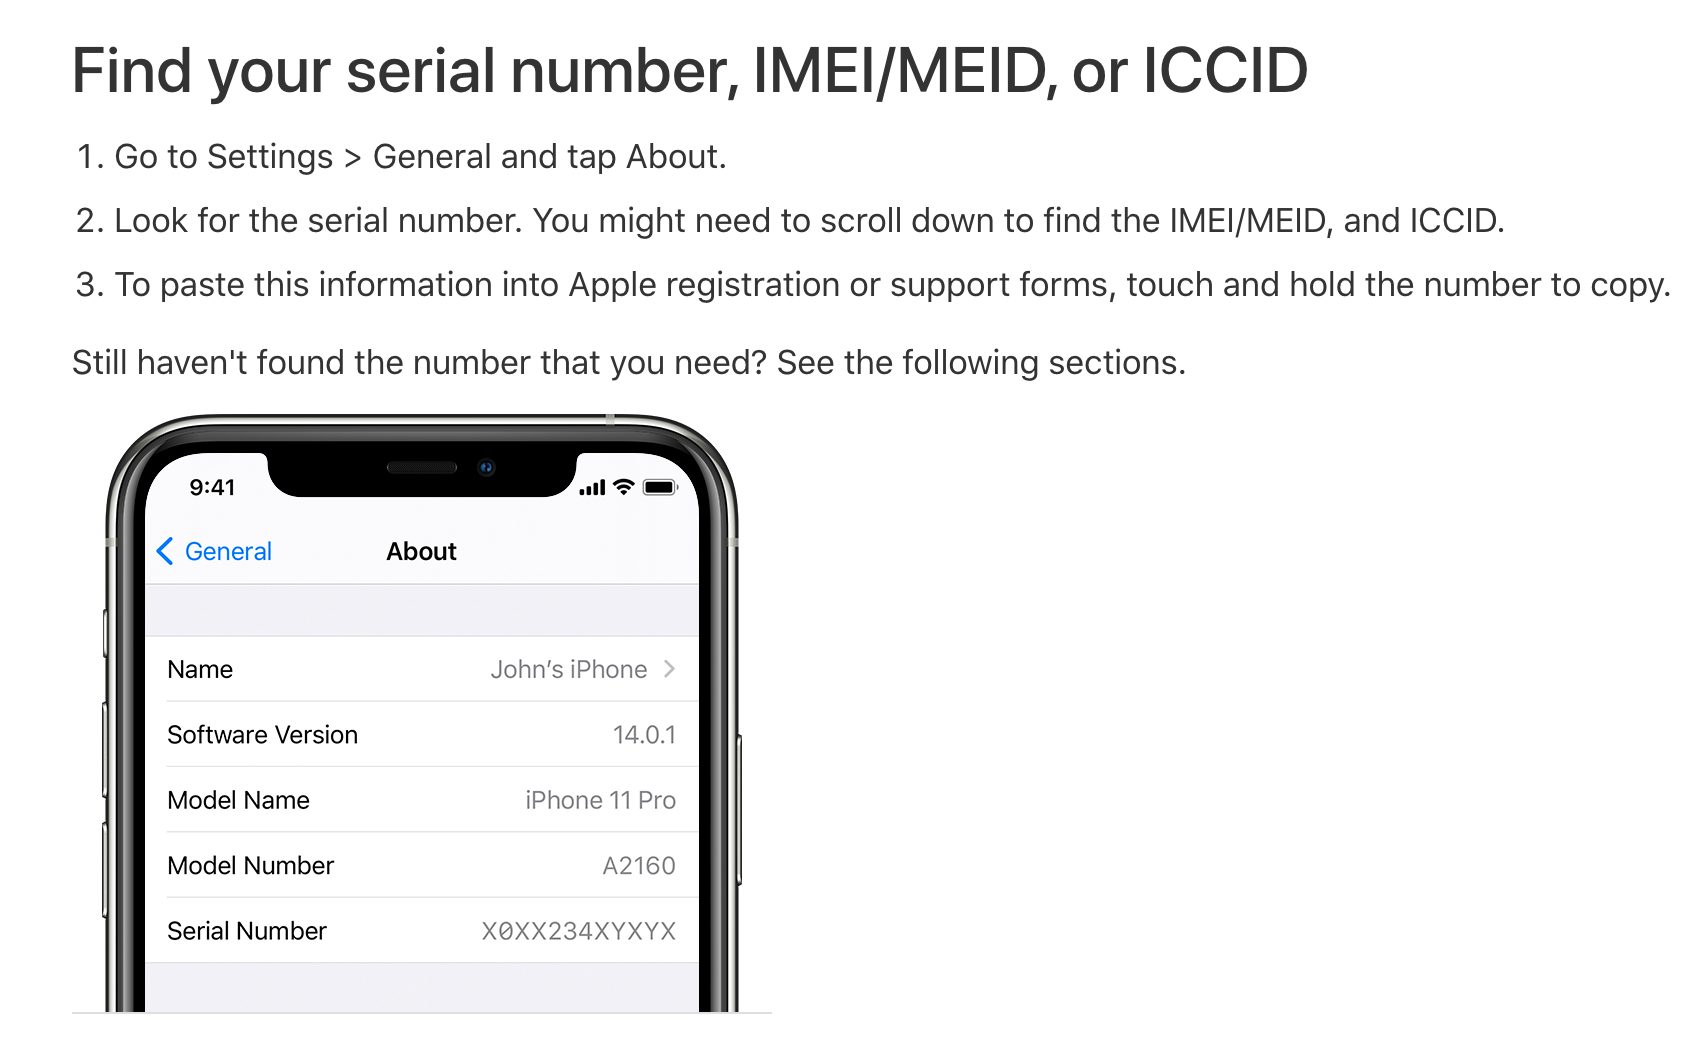 how to find the serial number on an iPad